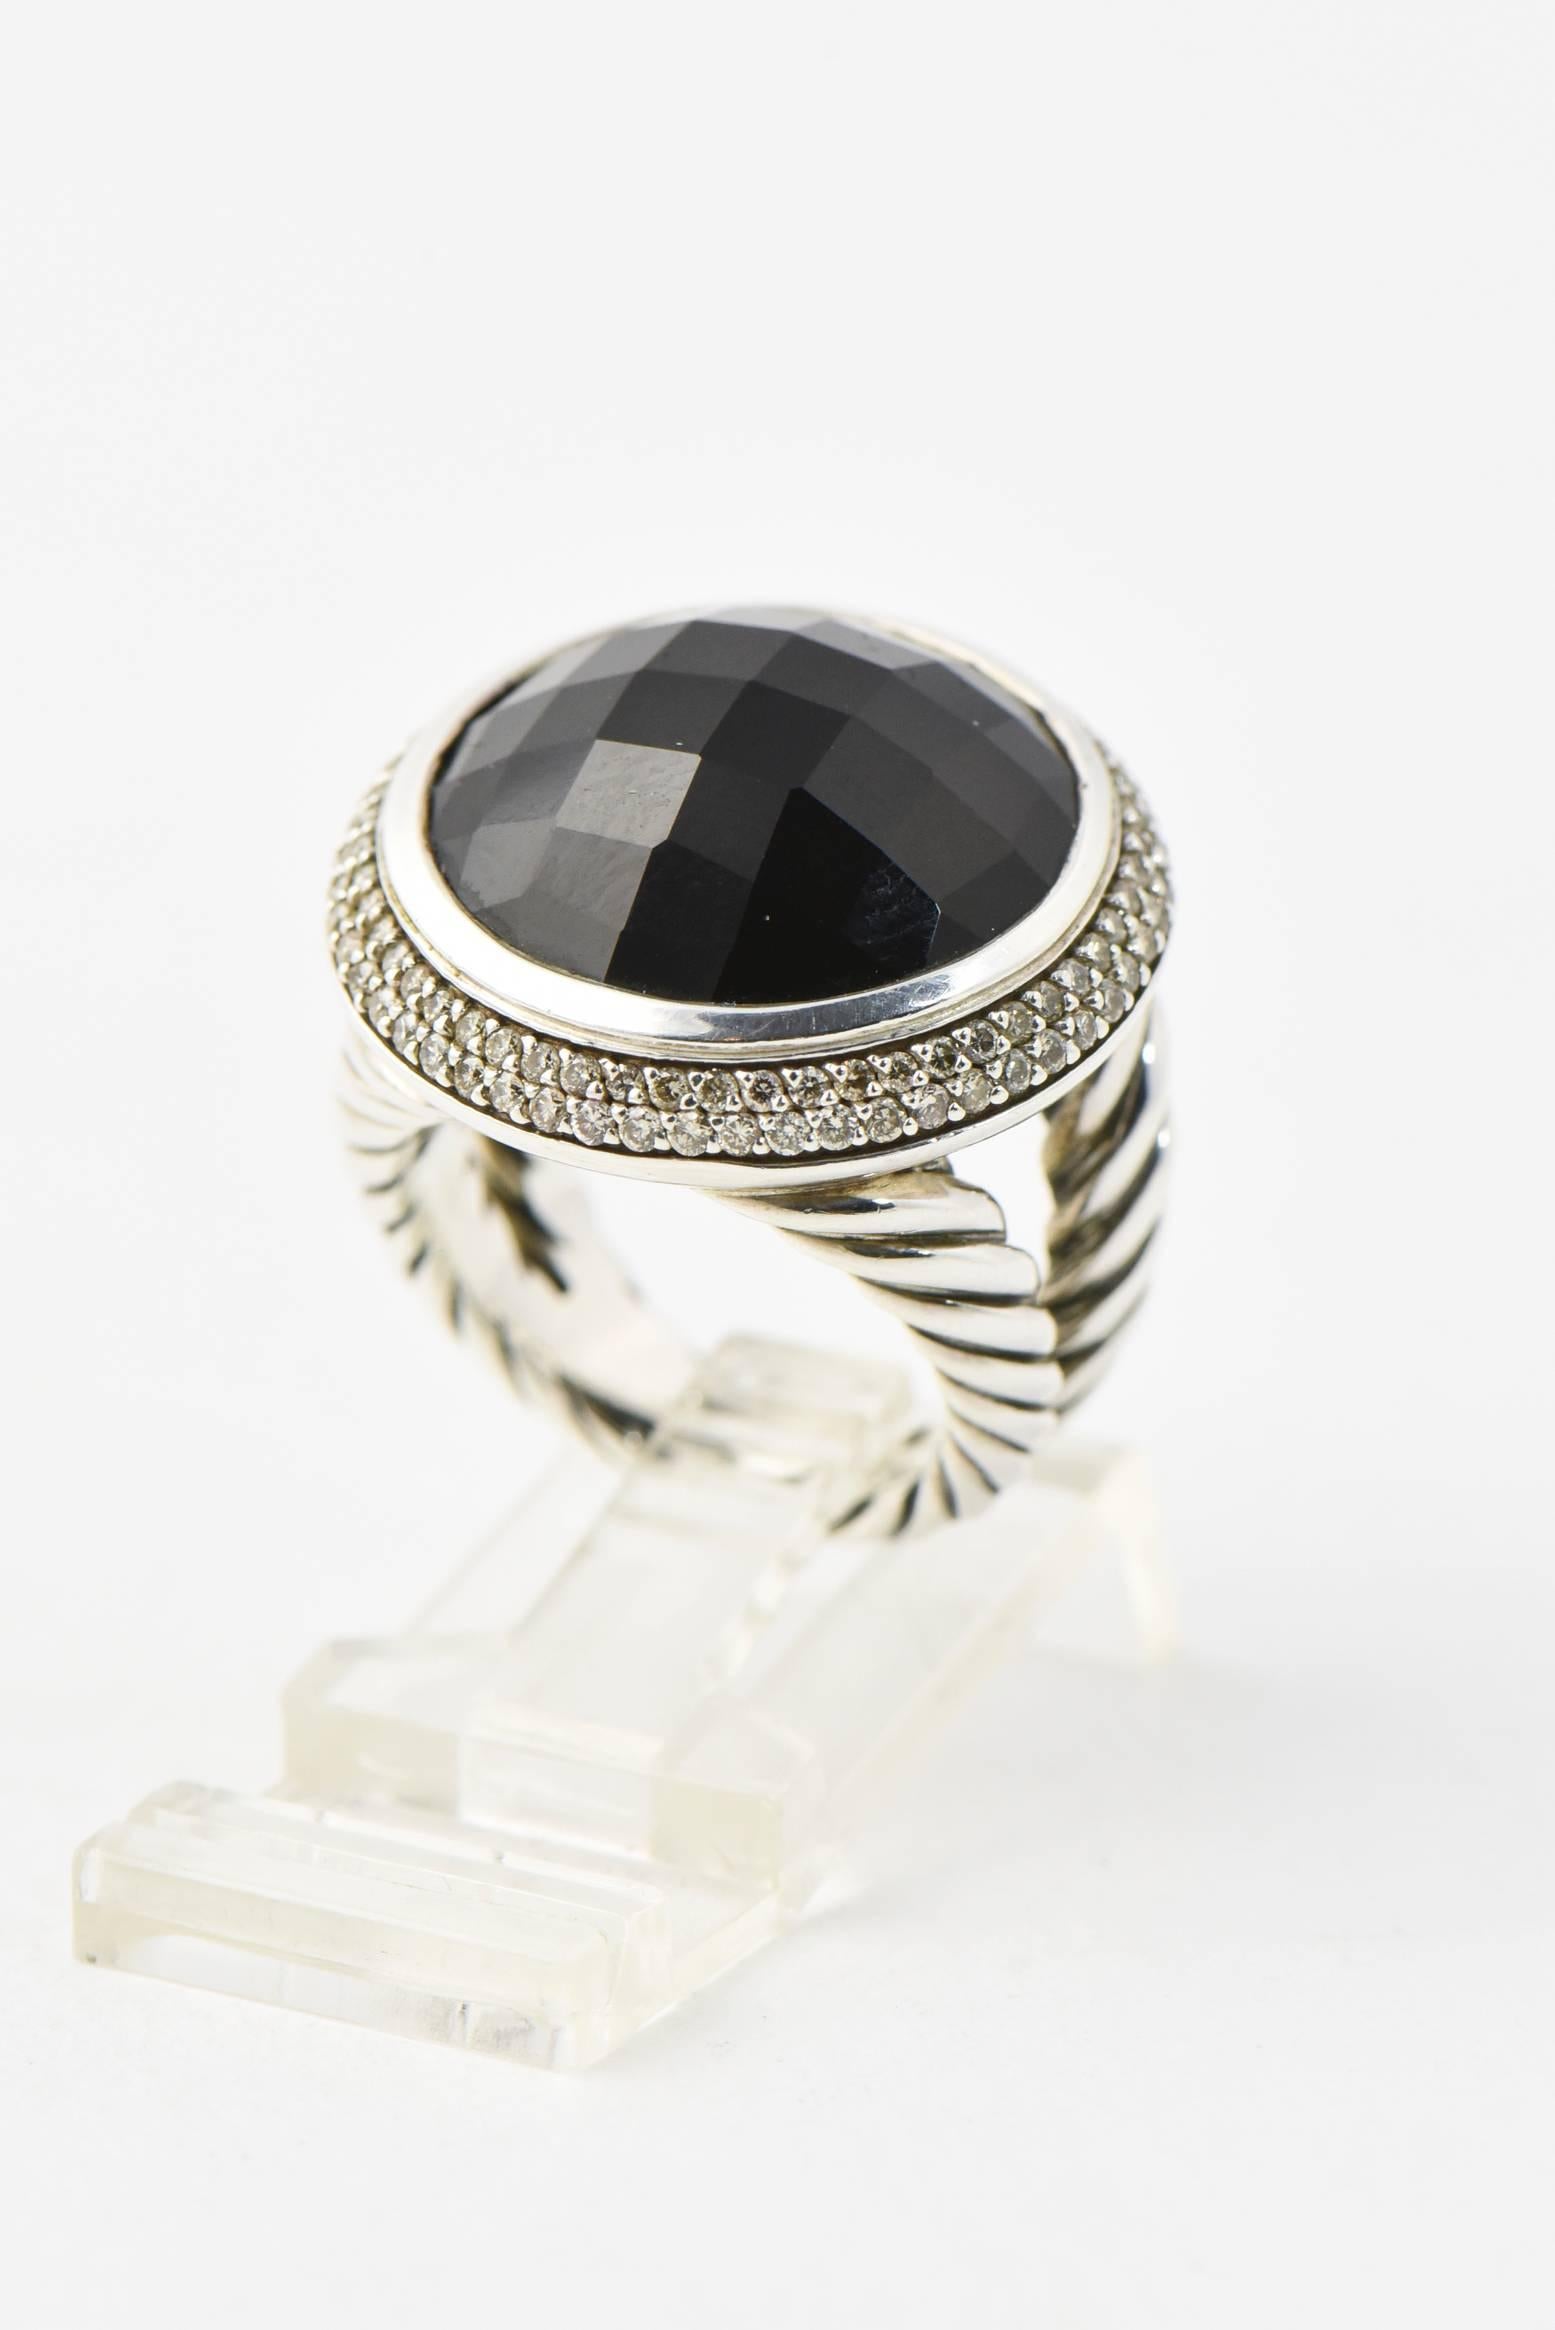 Stunning David Yurman Cerise ring featuring 17mm facetted round onyx surrounded by 0.70ctw in pave set diamonds in sterling silver.  The onyx rests in the classic David Yurman sterling silver cable split shank. 

 ring size - 5.5 US (it can be